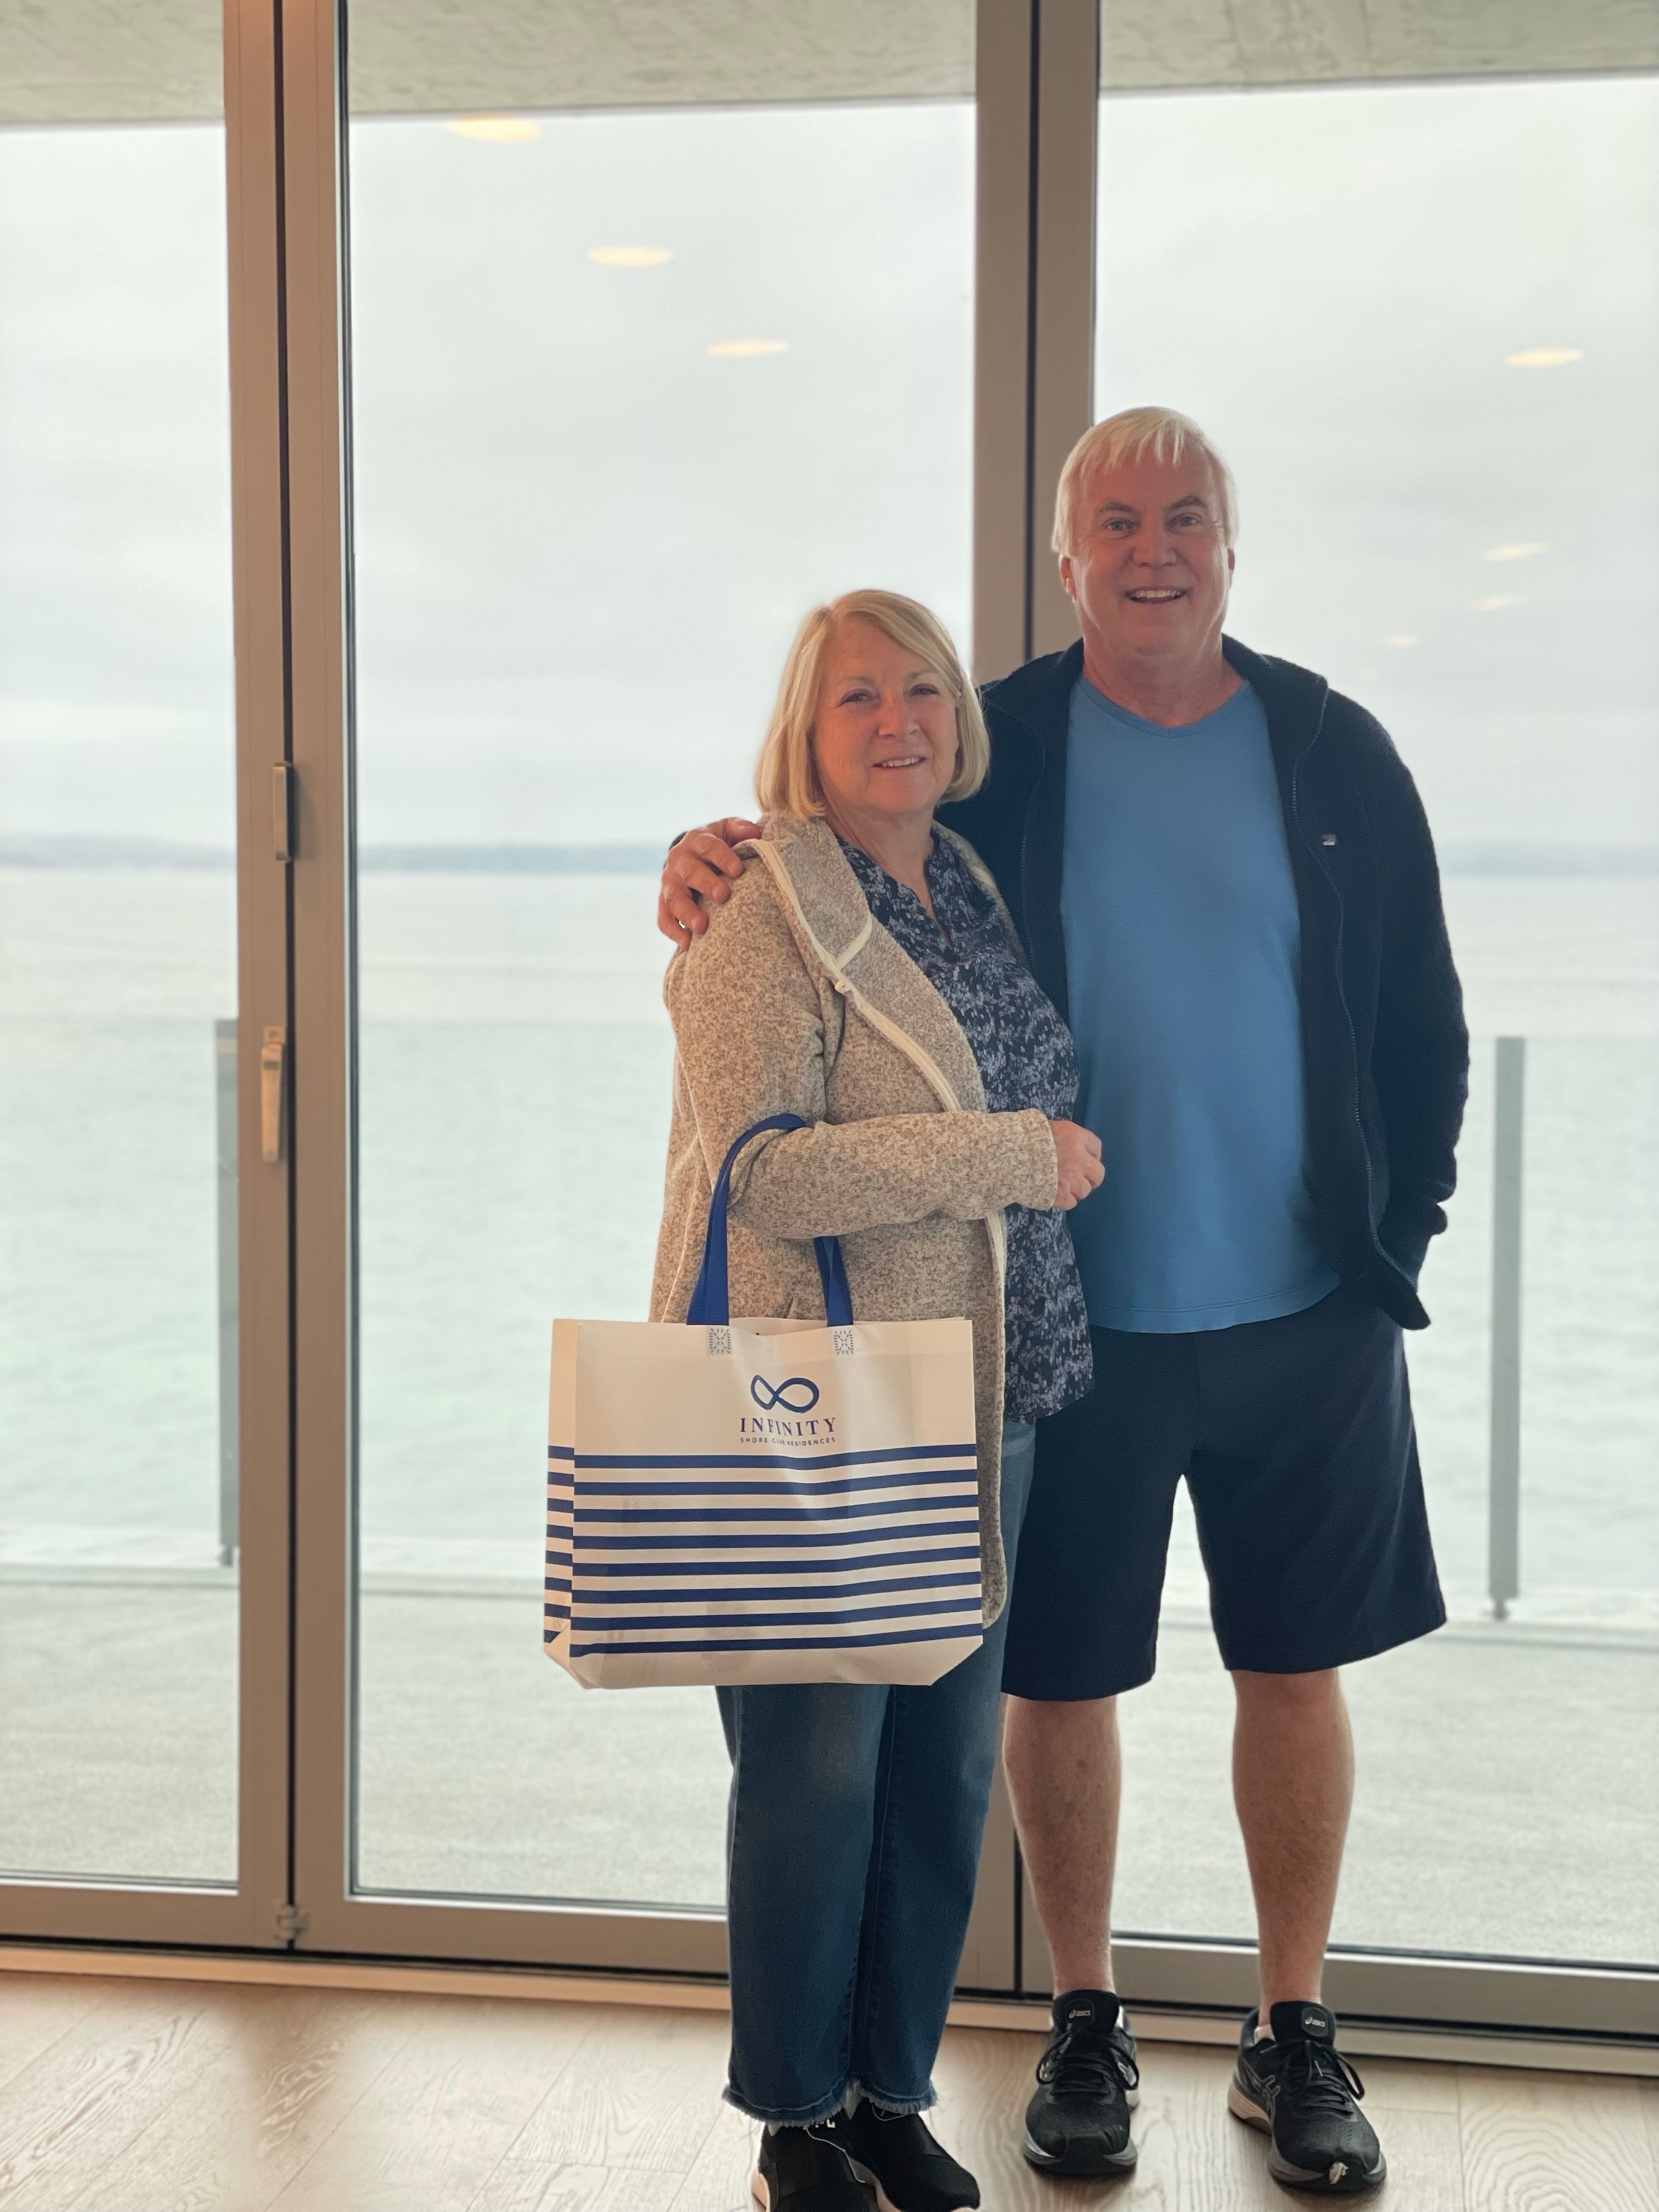 Infinity Shore Club Residences' first residents Mark and Susan Braseth look forward to enjoying the unmatched amenities, location, and design offered in the luxury beachfront building.